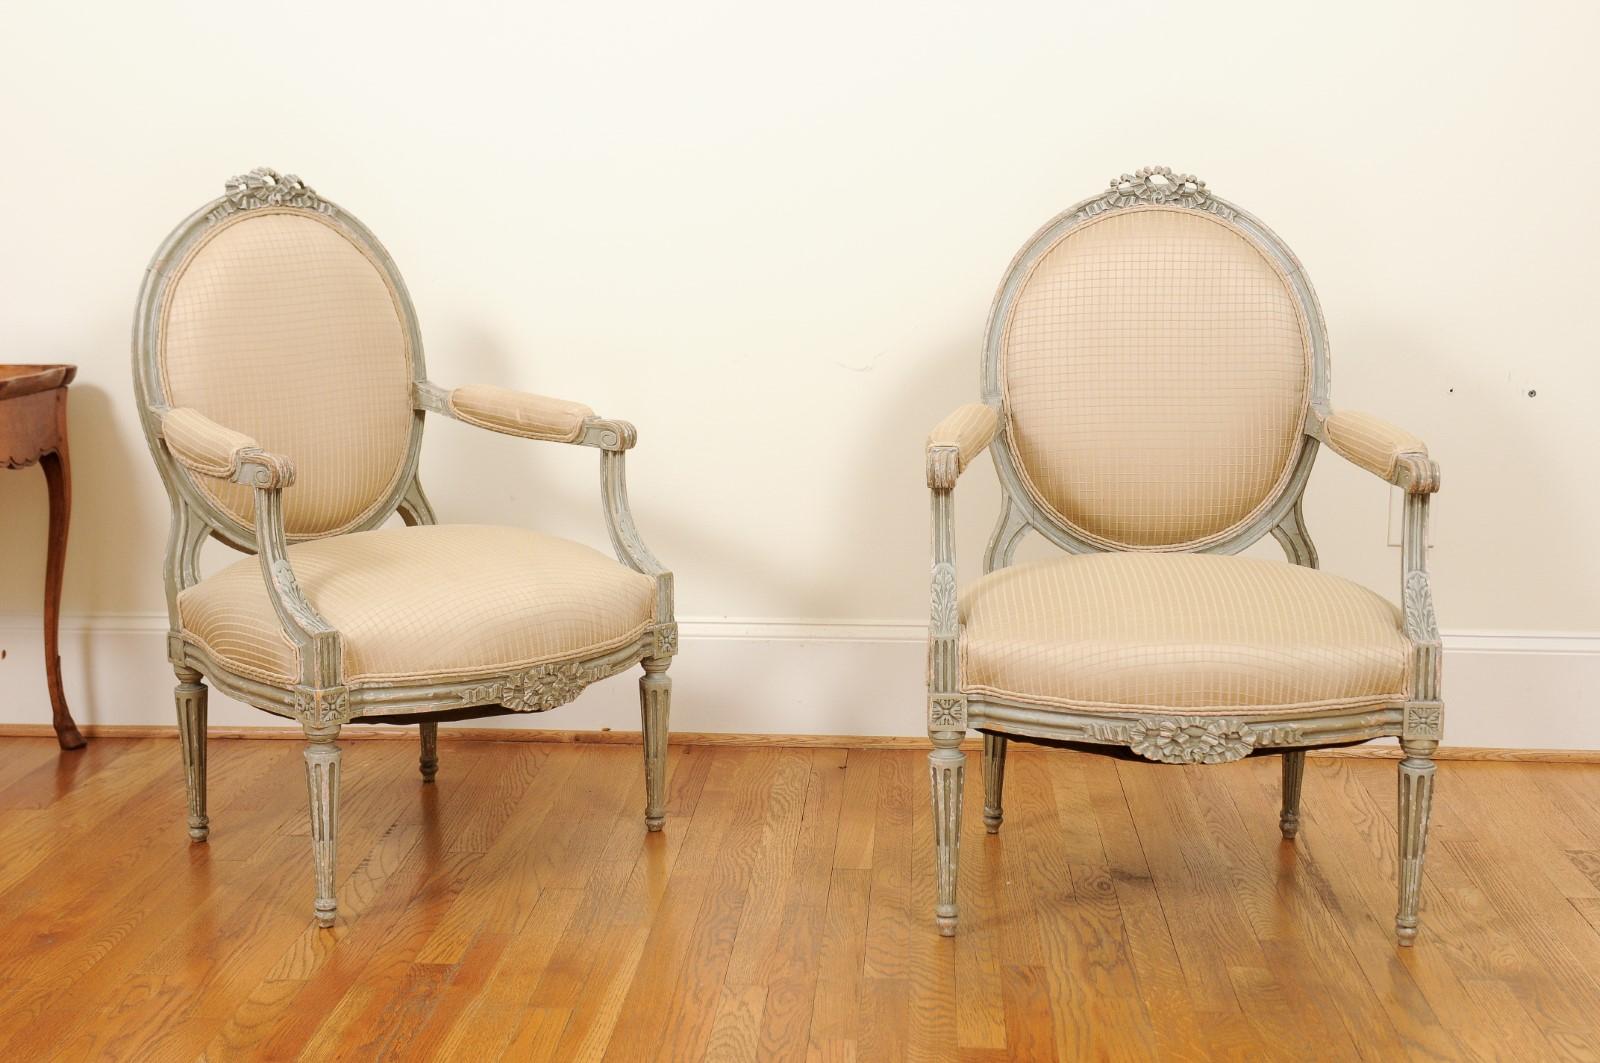 A pair of French Louis XVI style painted oval back armchairs from the mid-19th century, with carved ribbons and fluted legs. Created in France at the beginning of Emperor Napoléon III's reign, this pair of armchairs showcases the stylistic